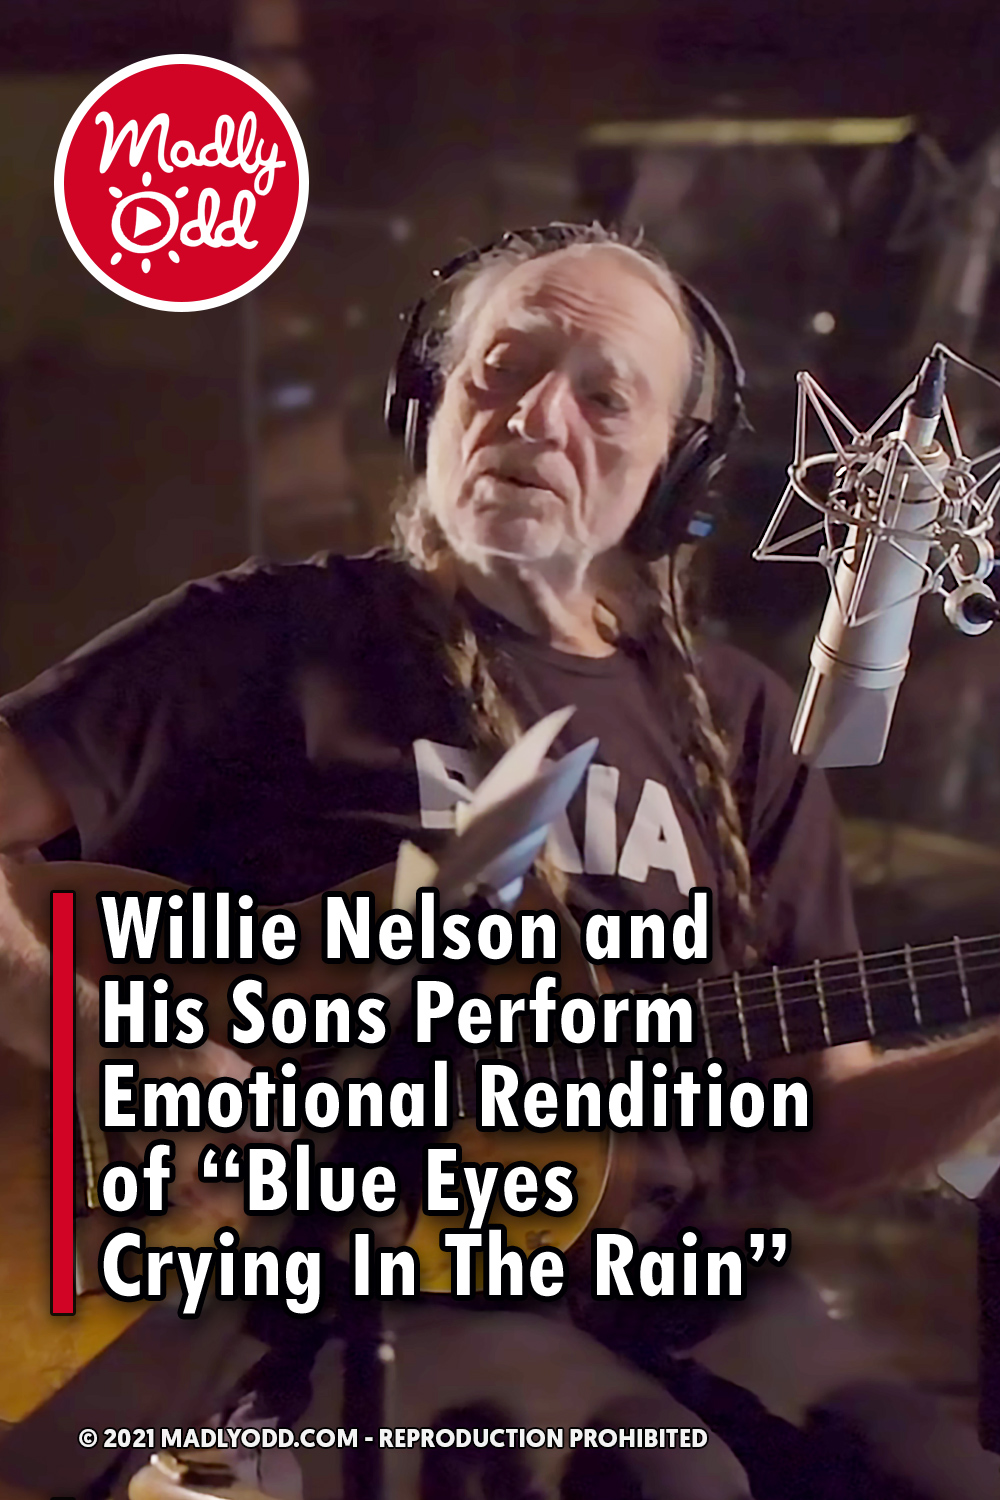 Willie Nelson and His Sons Perform Emotional Rendition of “Blue Eyes Crying In The Rain”